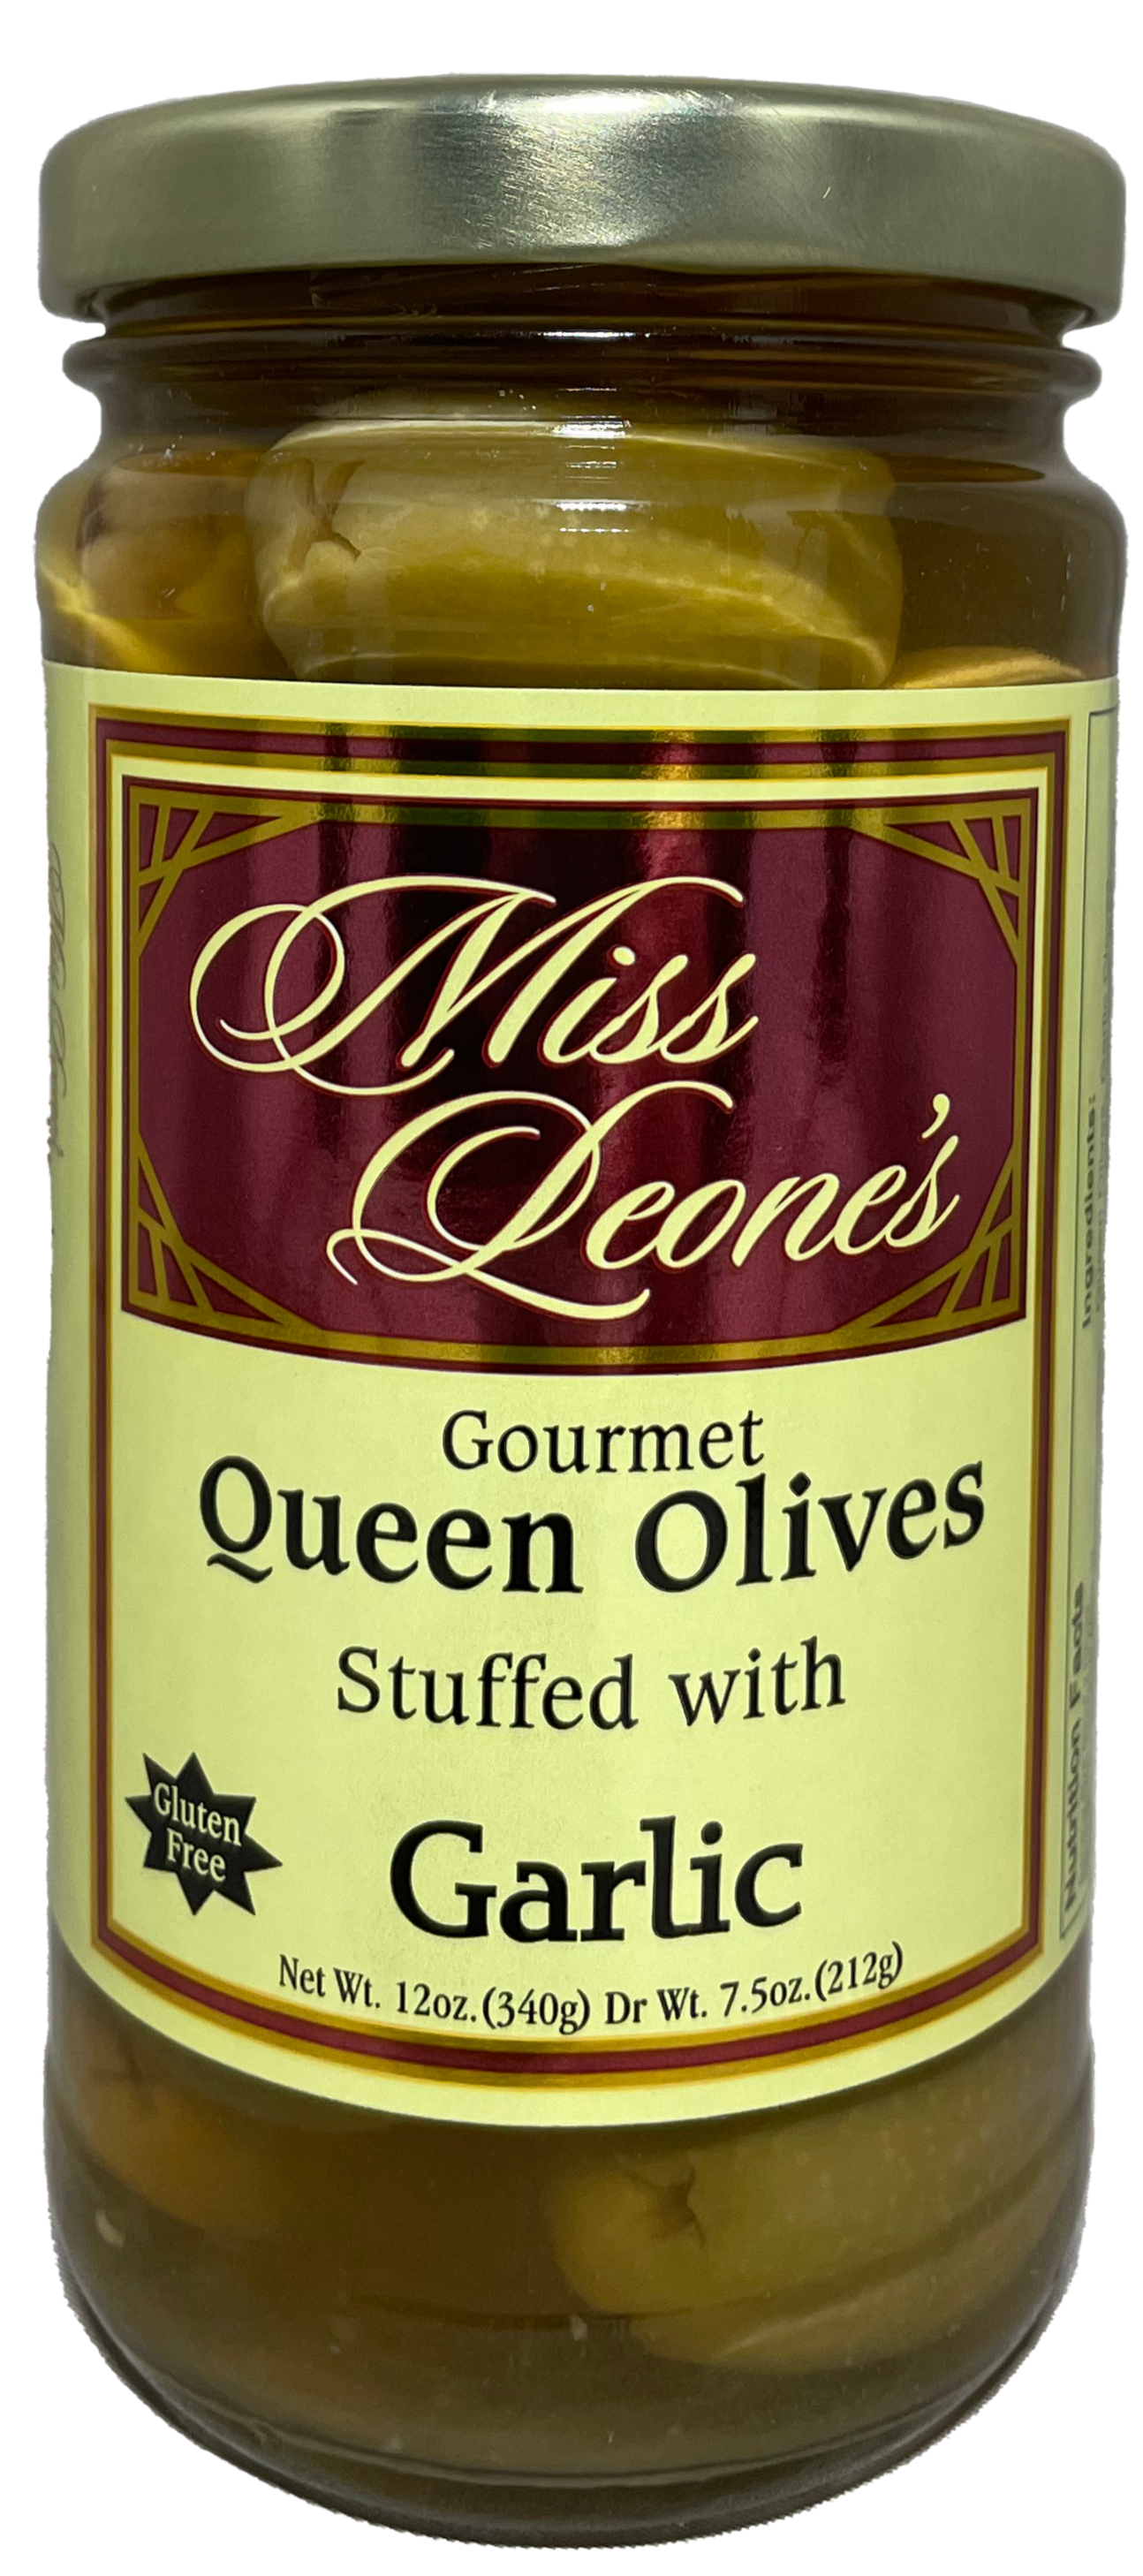 Garlic Stuffed Queen Olives *NEW LOWER PRICE*